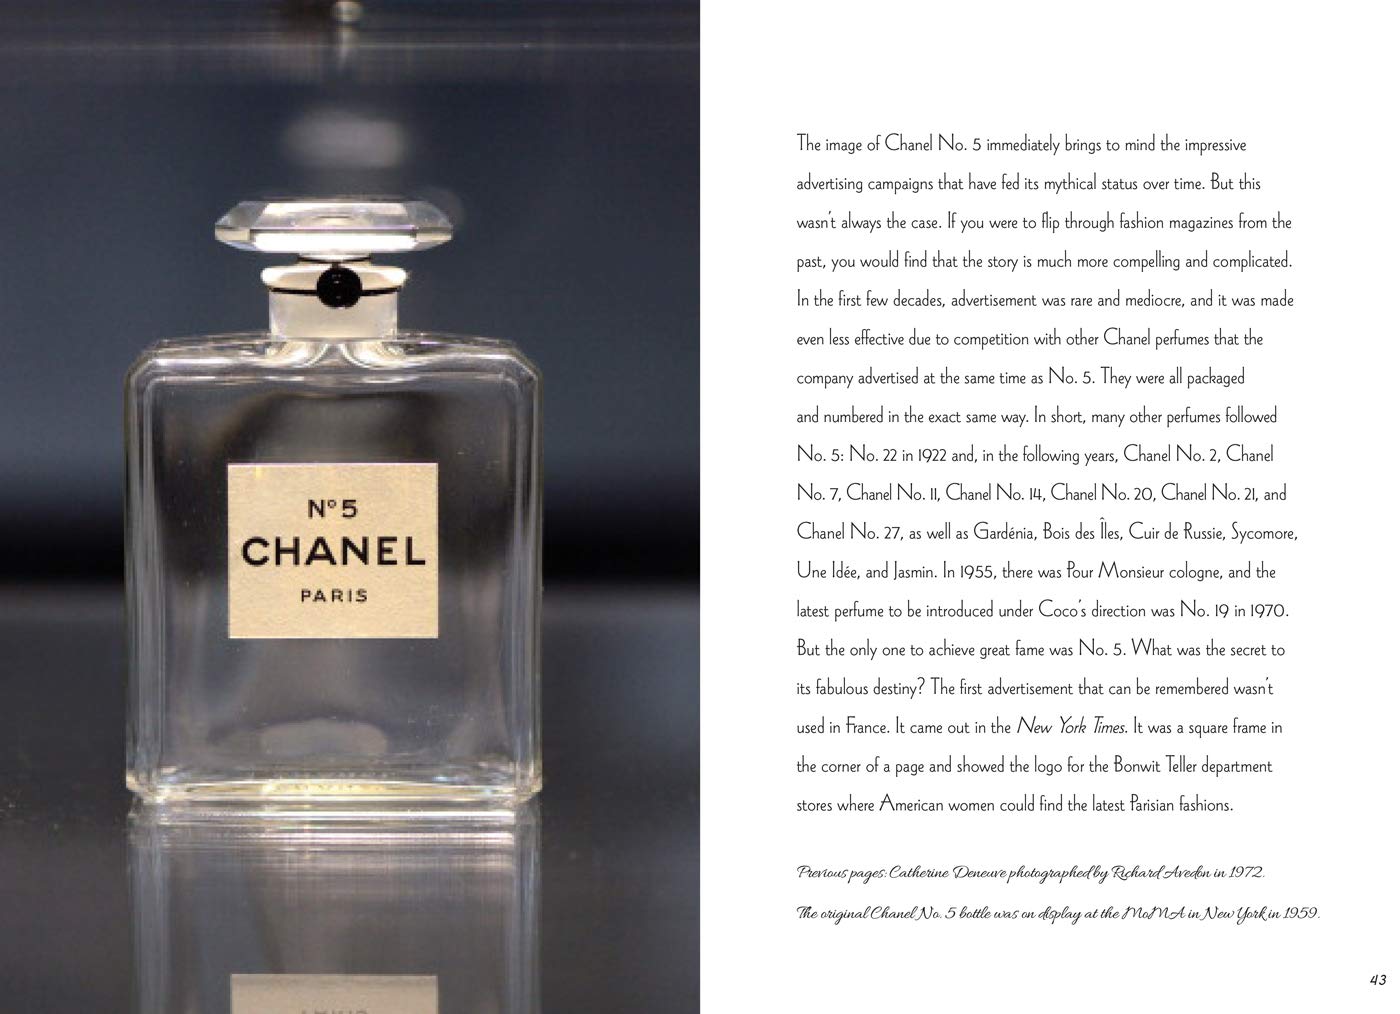 Chanel celebrates the iconic No. 5 fragrance's centennial by